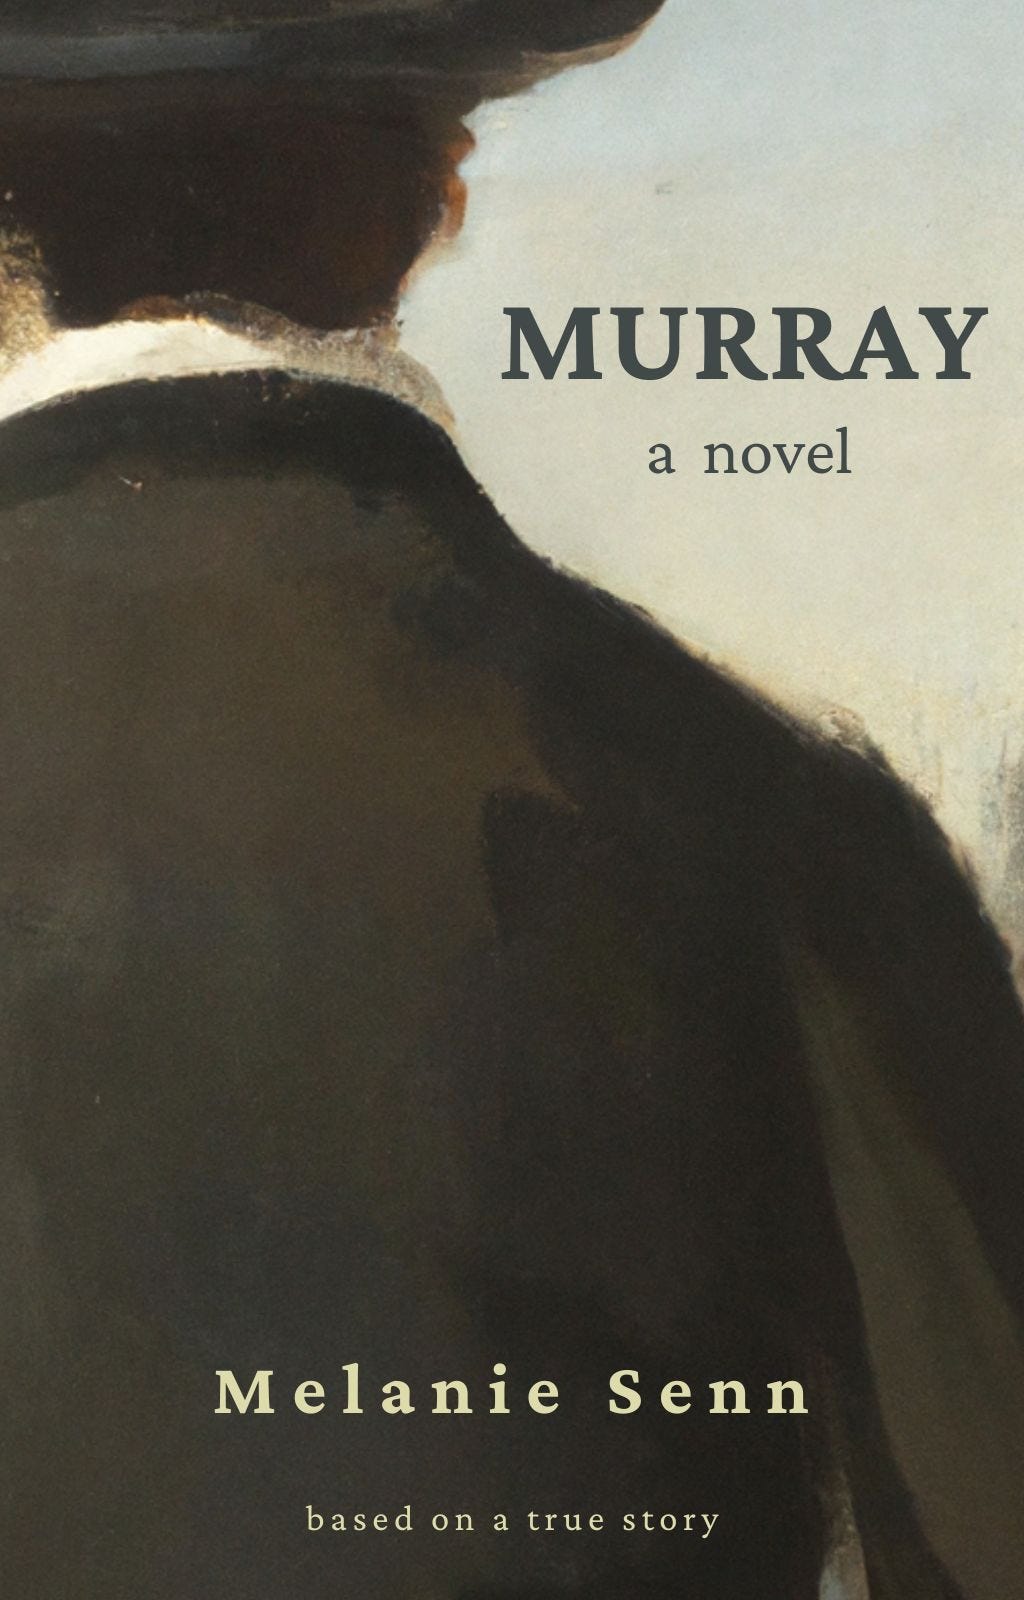 A book cover with an image of the back of someone with the author’s name, Melanie Senn, and the book title: Murray: based on a true story